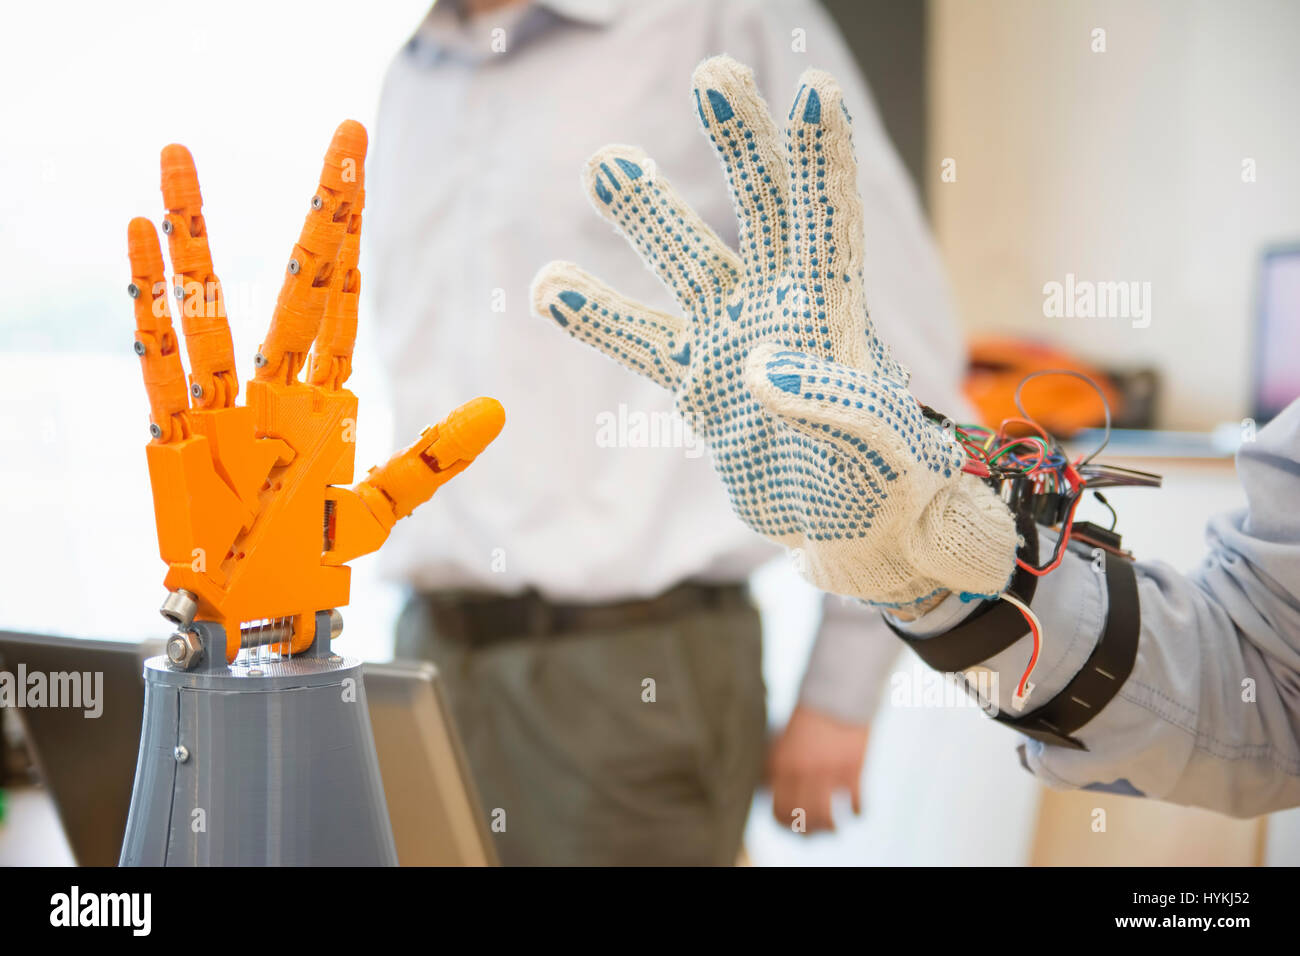 Controlling Robotic Hand With Remote Glove Stock Photo